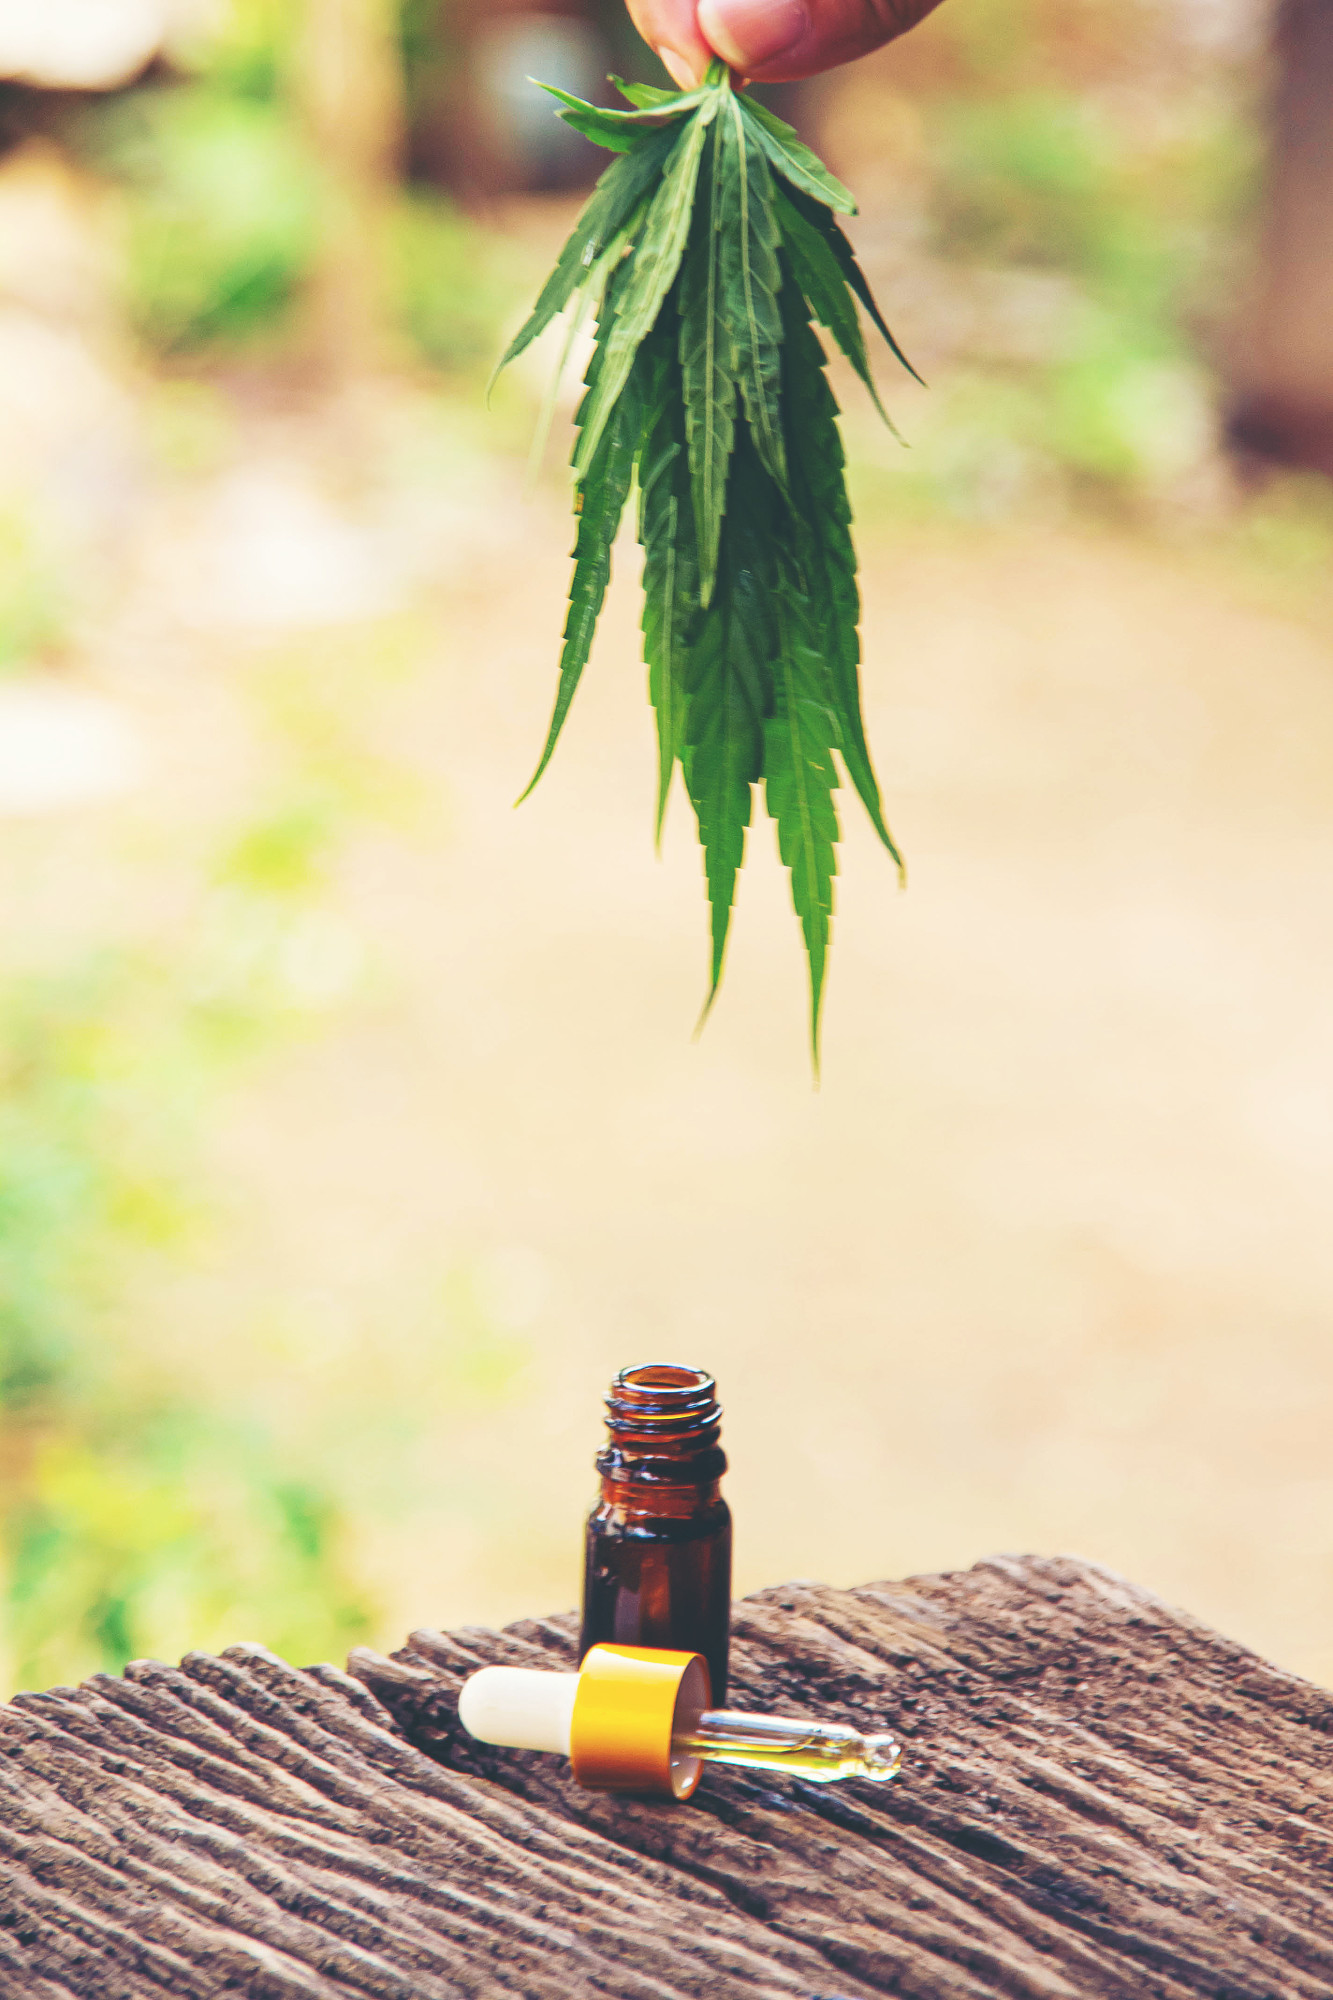 Know Your Dose: How to Find Your Optimal CBD Oil Dosage